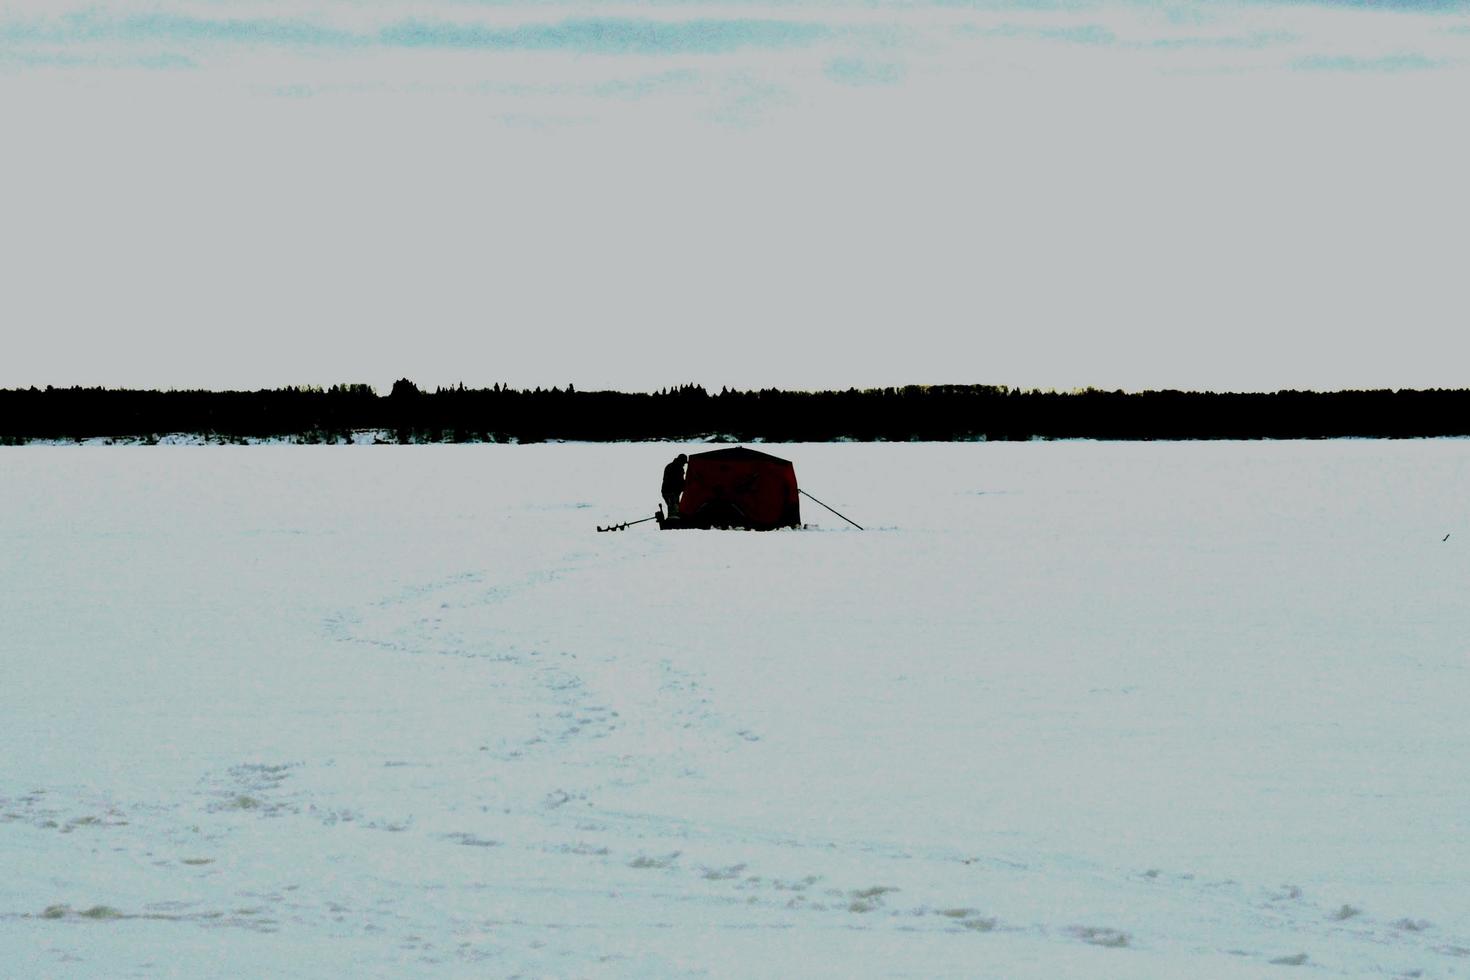 winter in Manitoba - ice fishing on a frozen lake photo